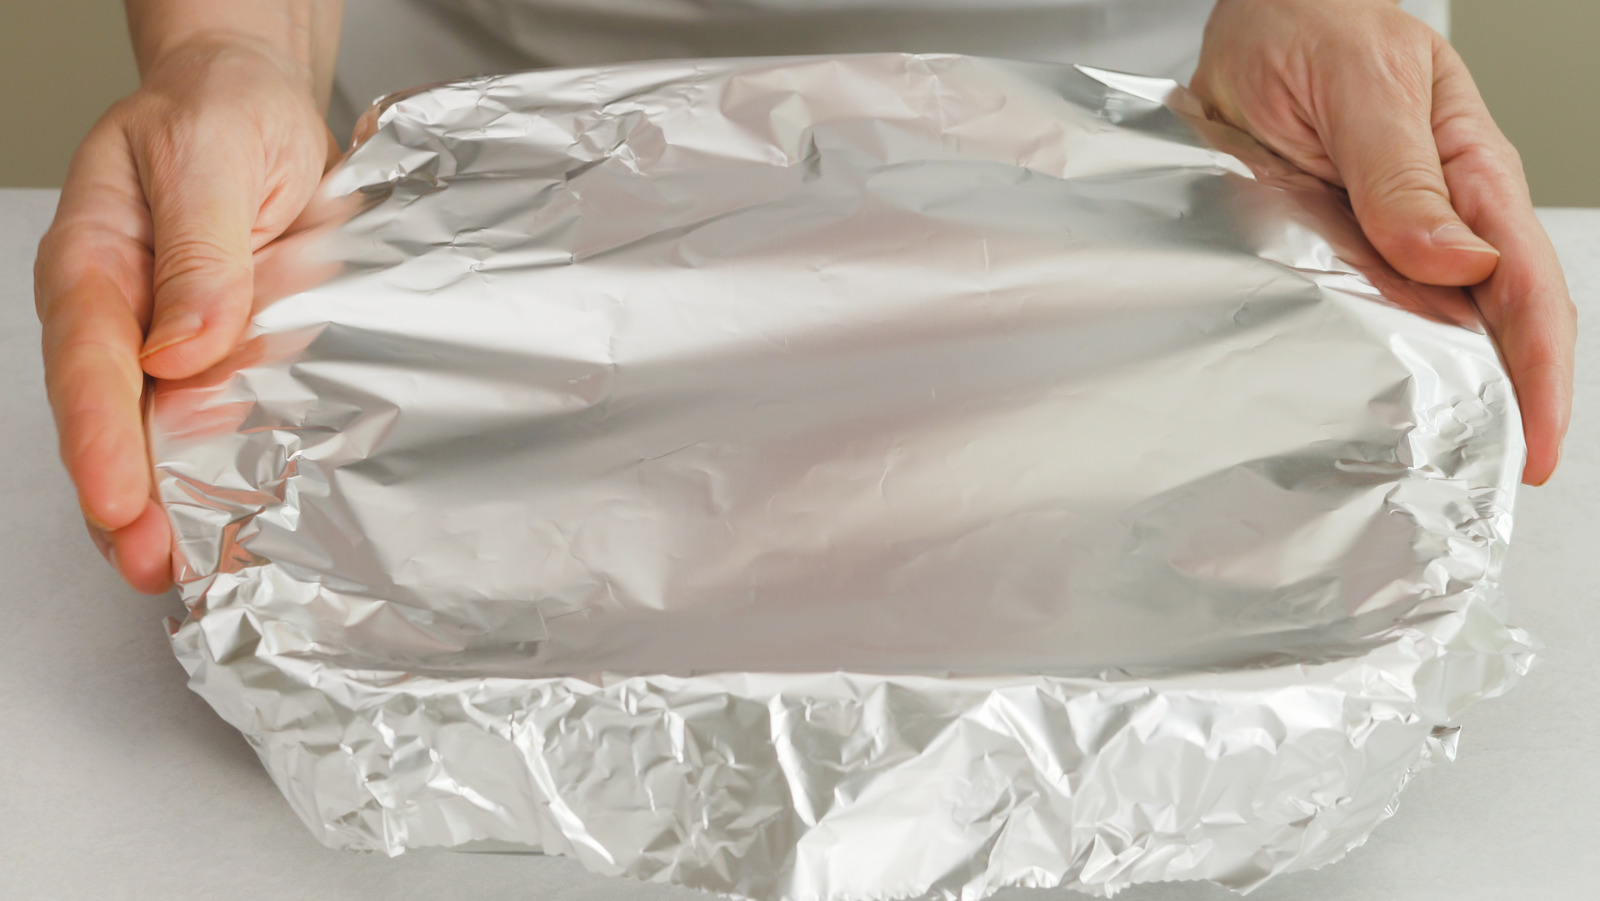 https://www.tastingtable.com/img/gallery/are-tin-foil-and-aluminum-foil-the-same-thing/l-intro-1657890900.jpg